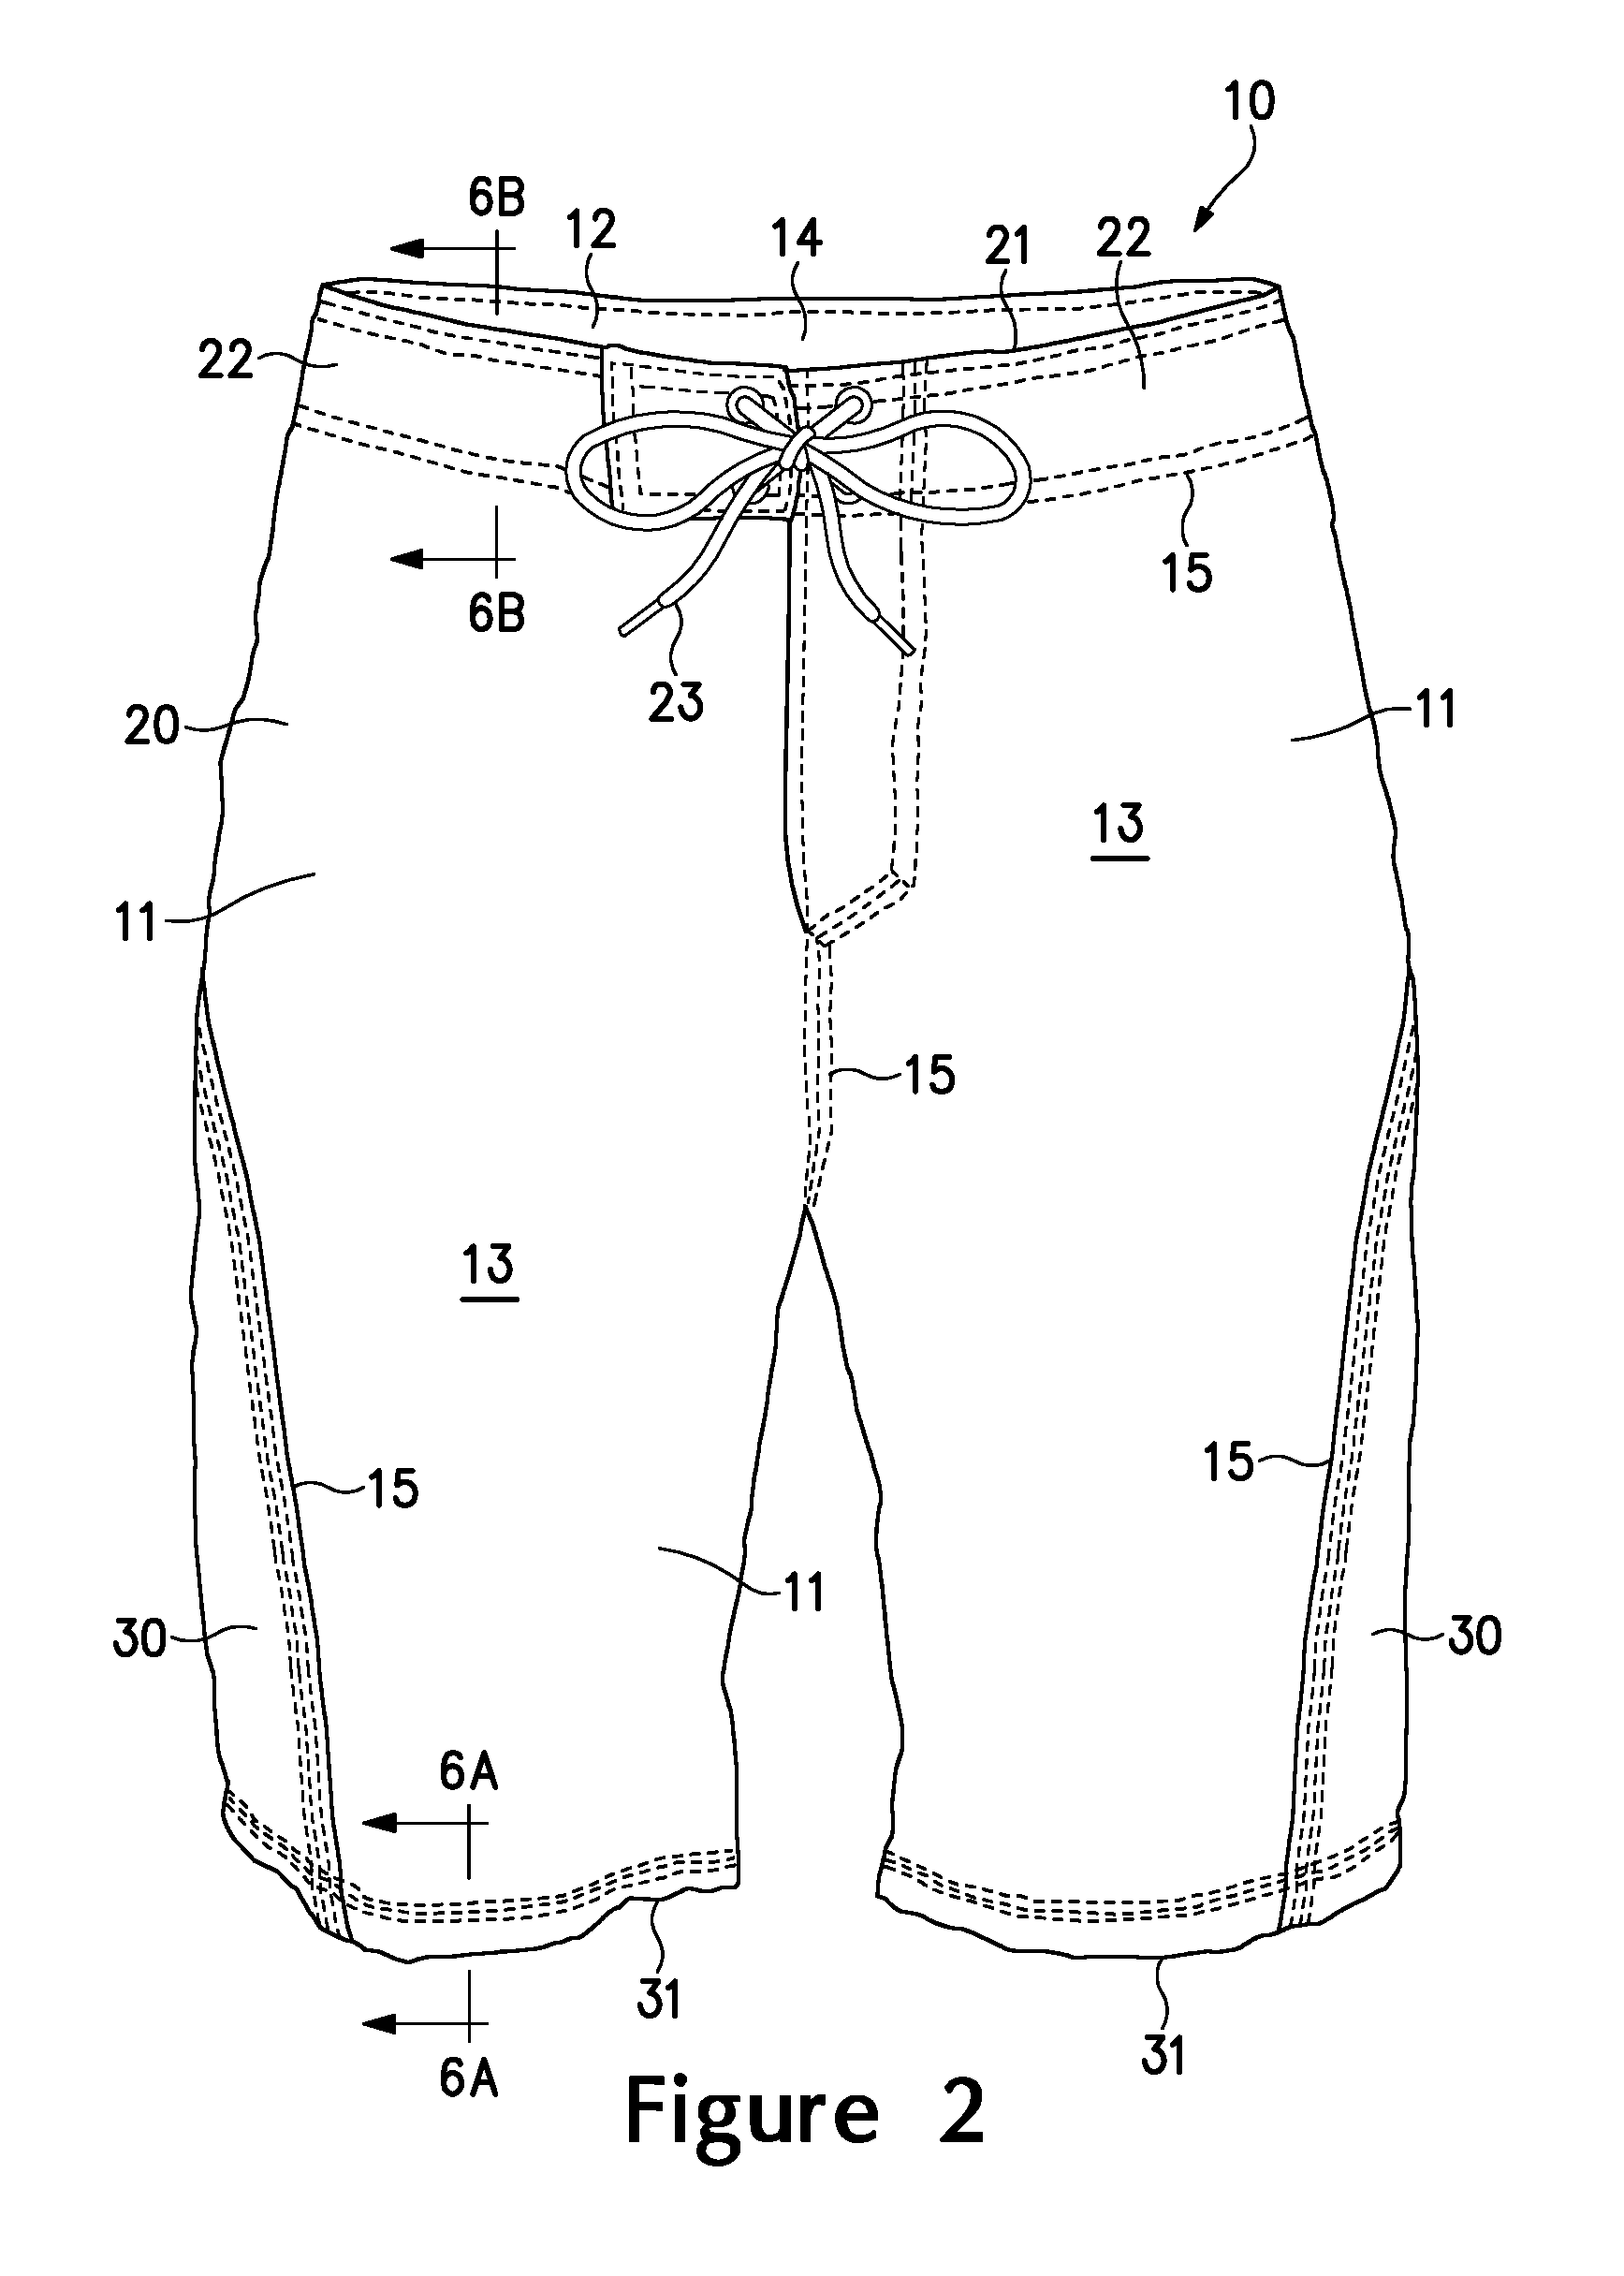 Water shorts incorporating a stretch textile